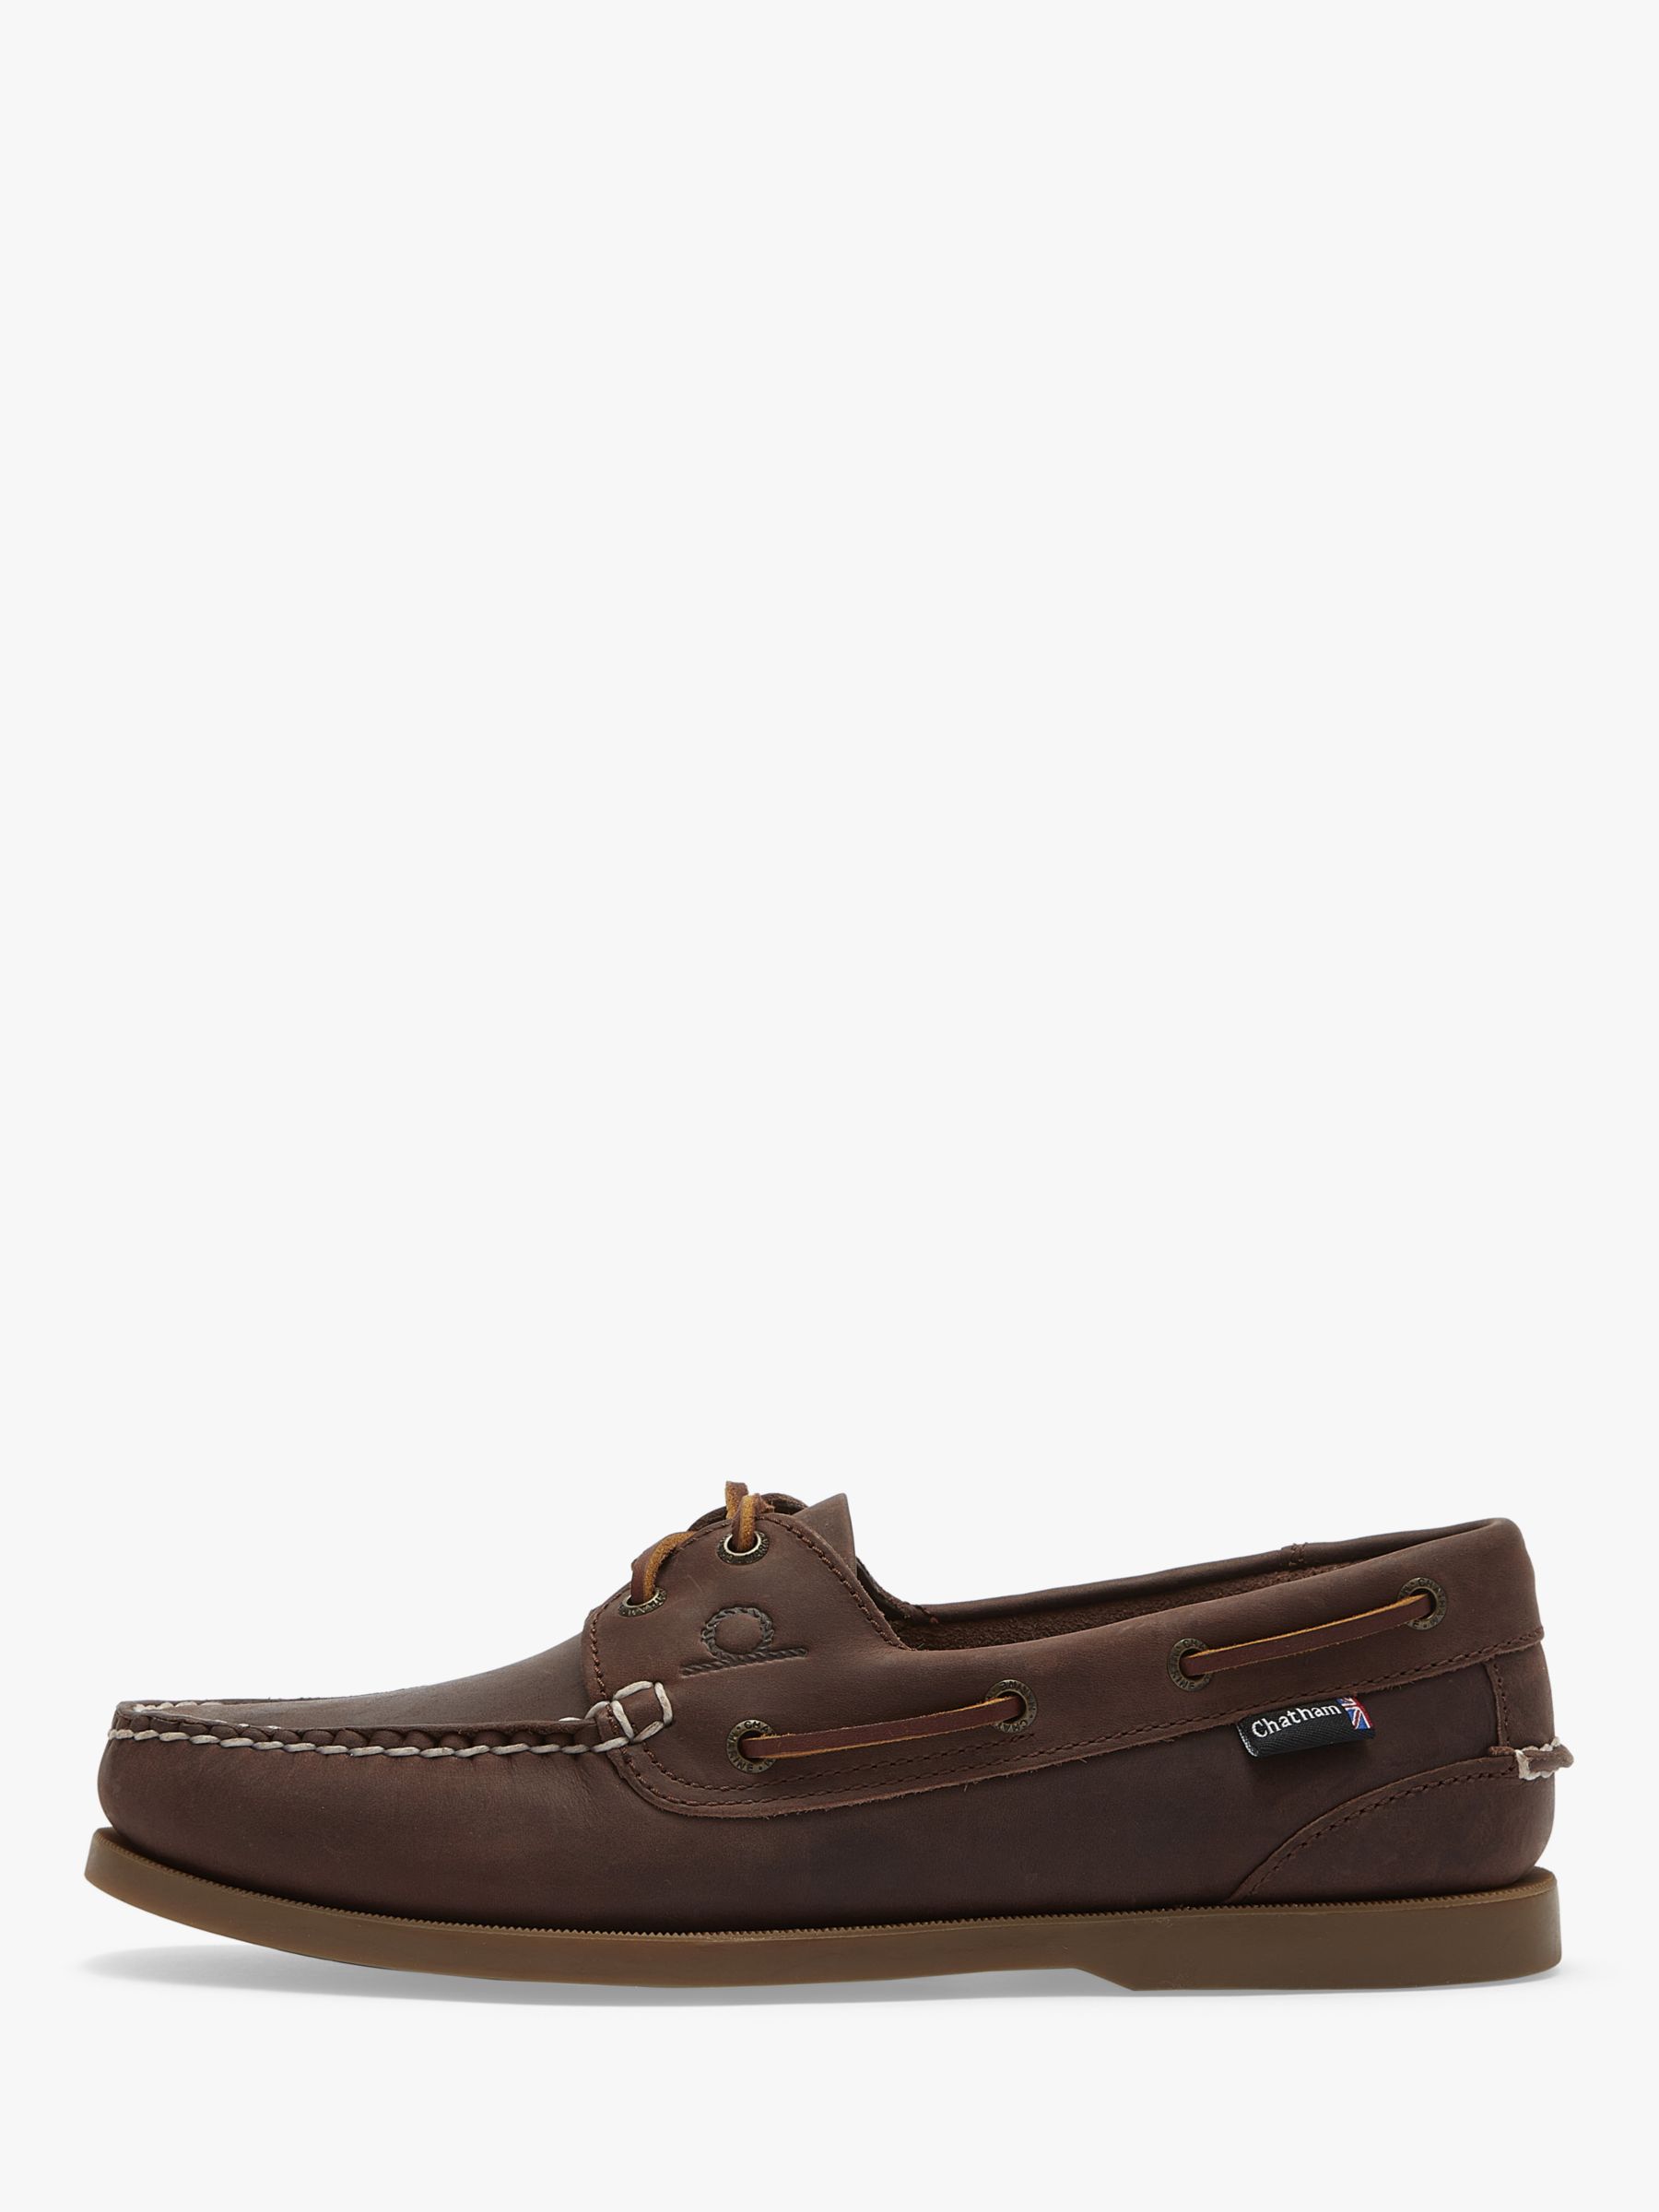 Chatham Deck II G2 Leather Boat Shoes, Chocolate, 7